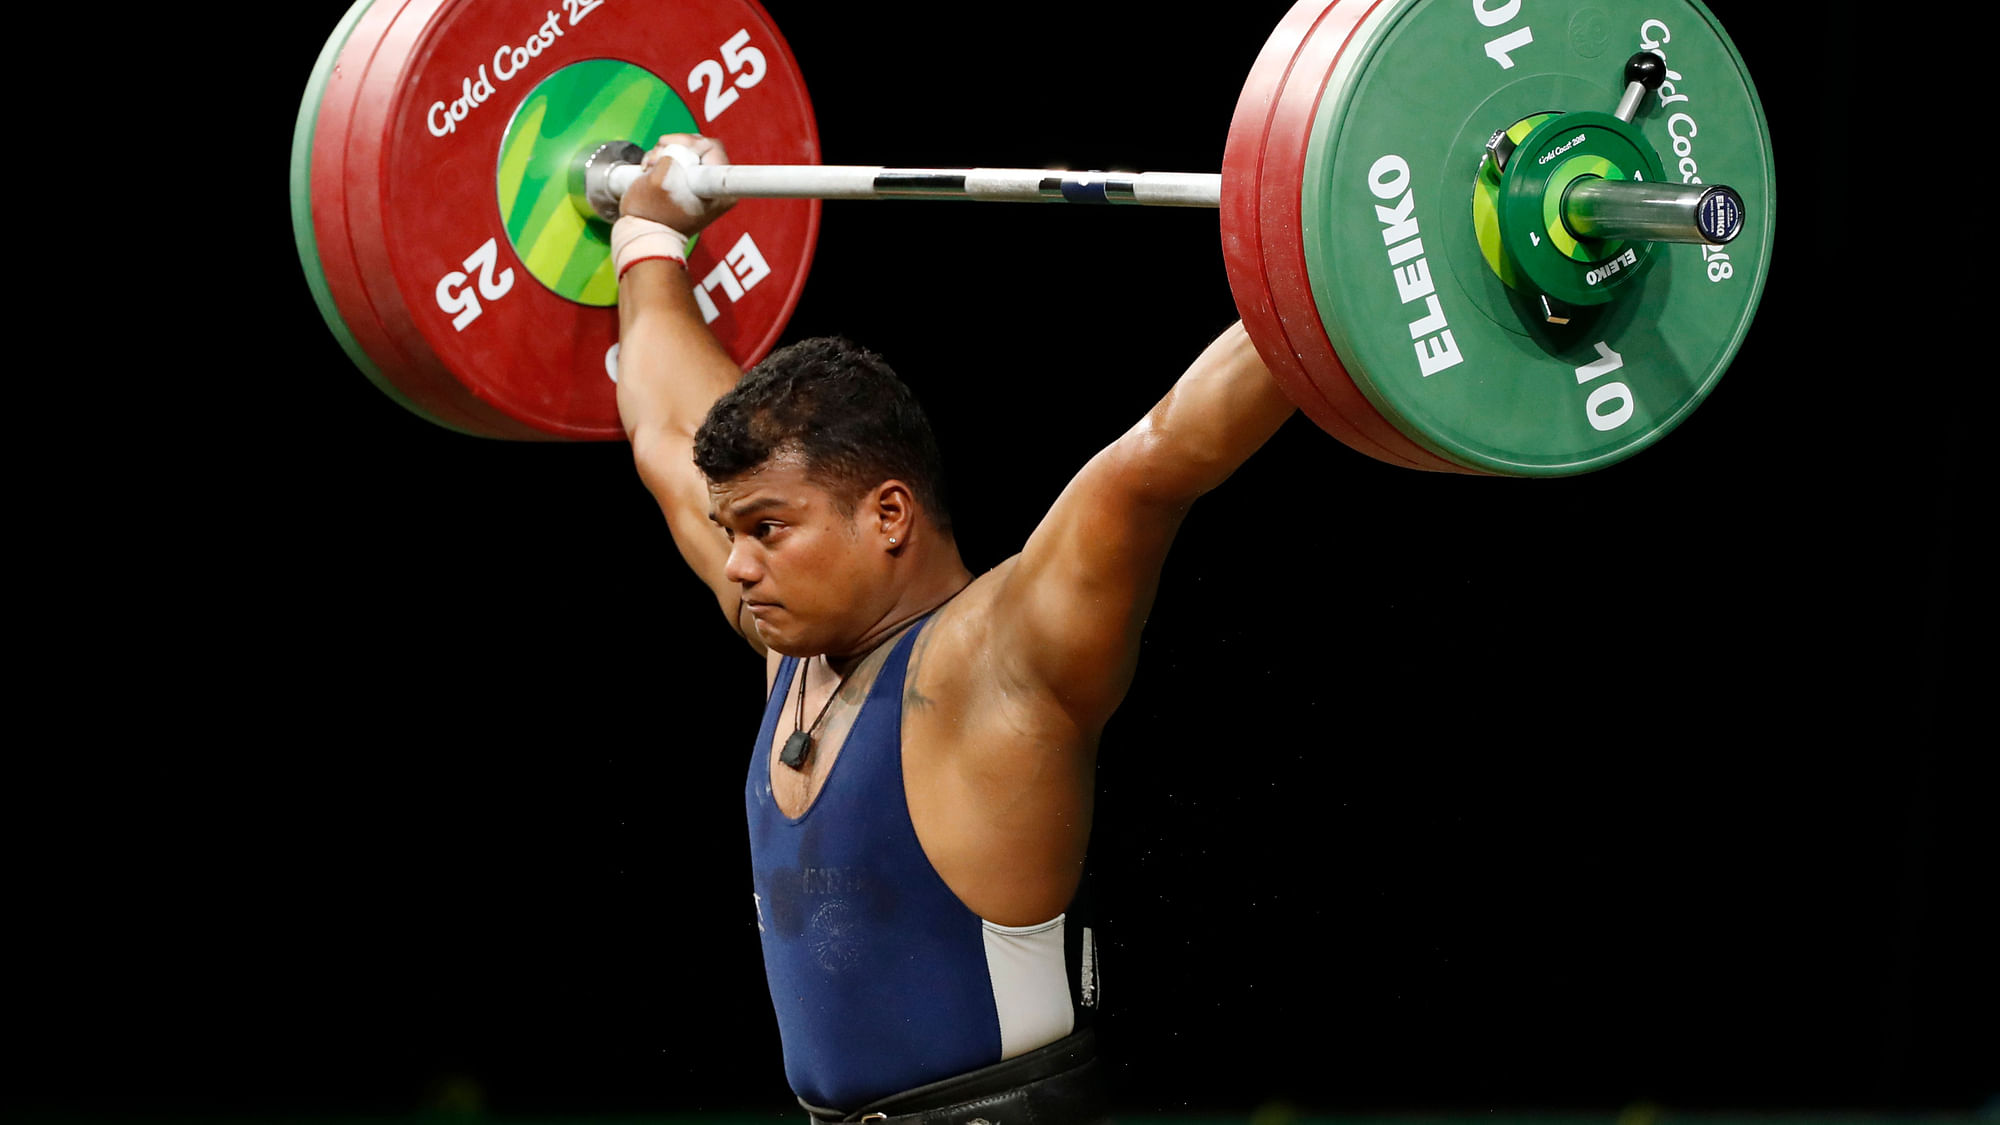 Indian weightlifter Venkat Rahul Ragala in action at the Gold Coast Commonwealth Games.